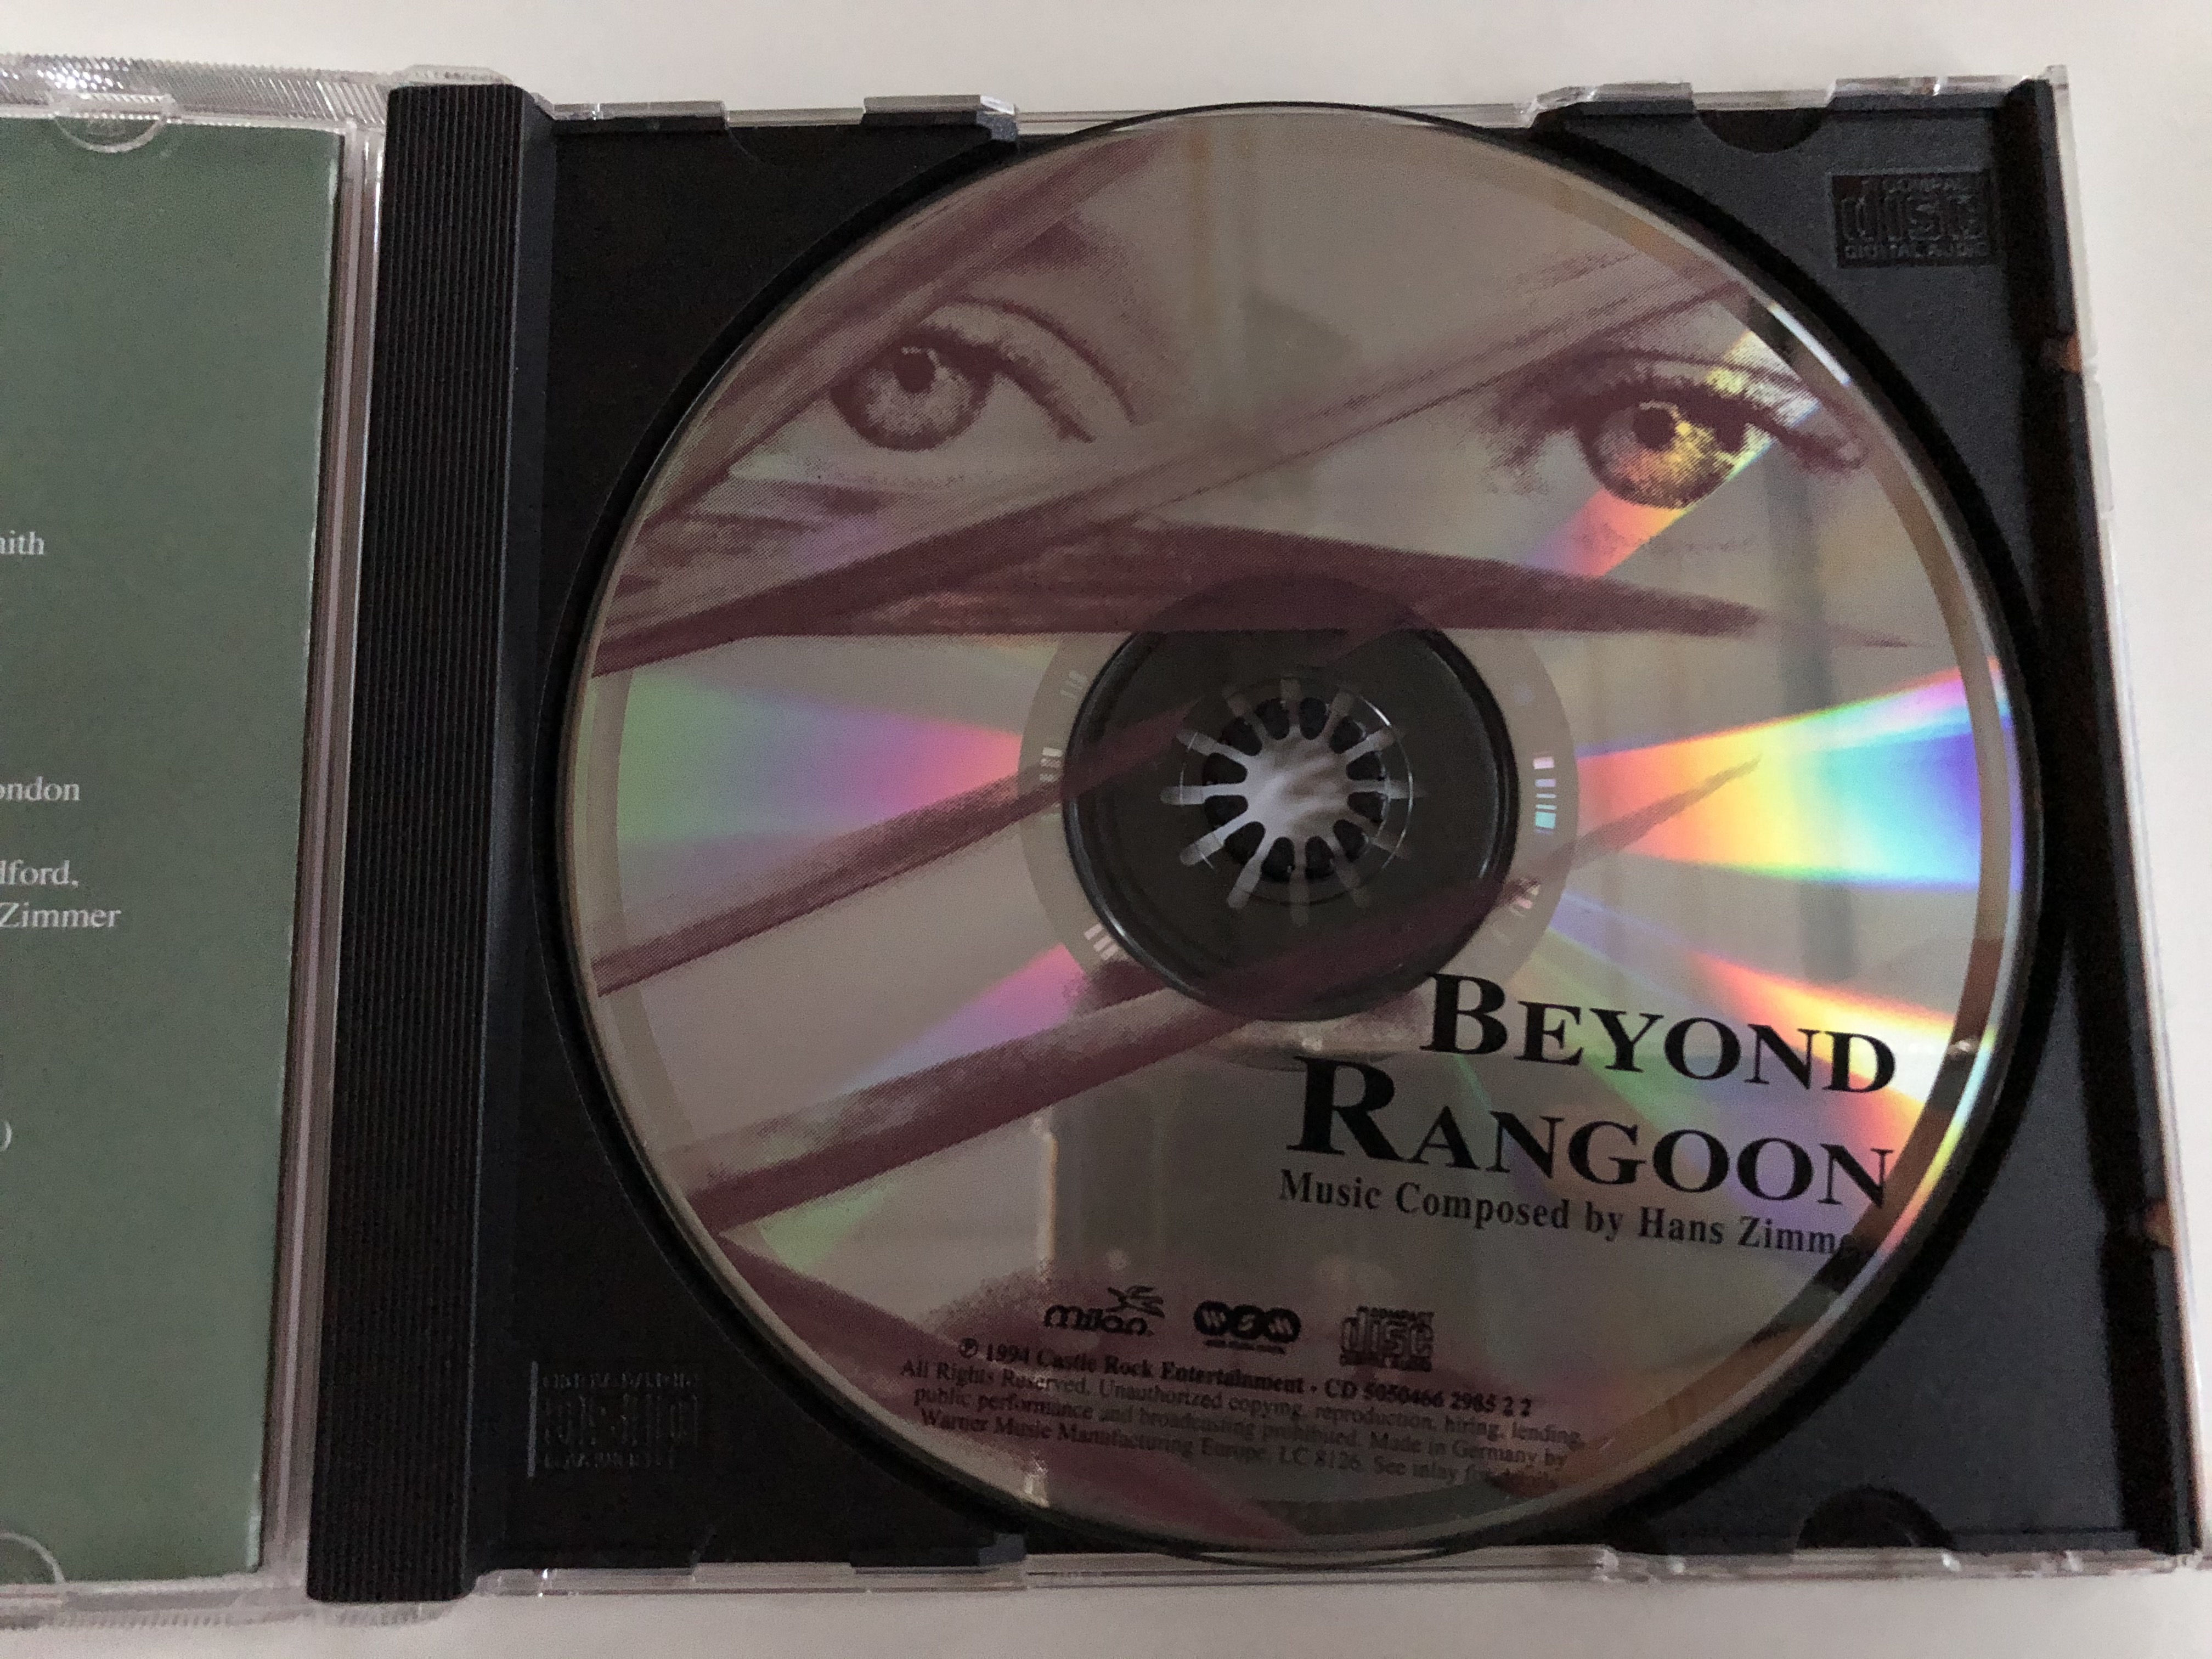 offical-selection-cannes-1995-beyond-rangoon-music-composed-by-hans-zimmer-milan-audio-cd-1995-5050466298522-3-.jpg